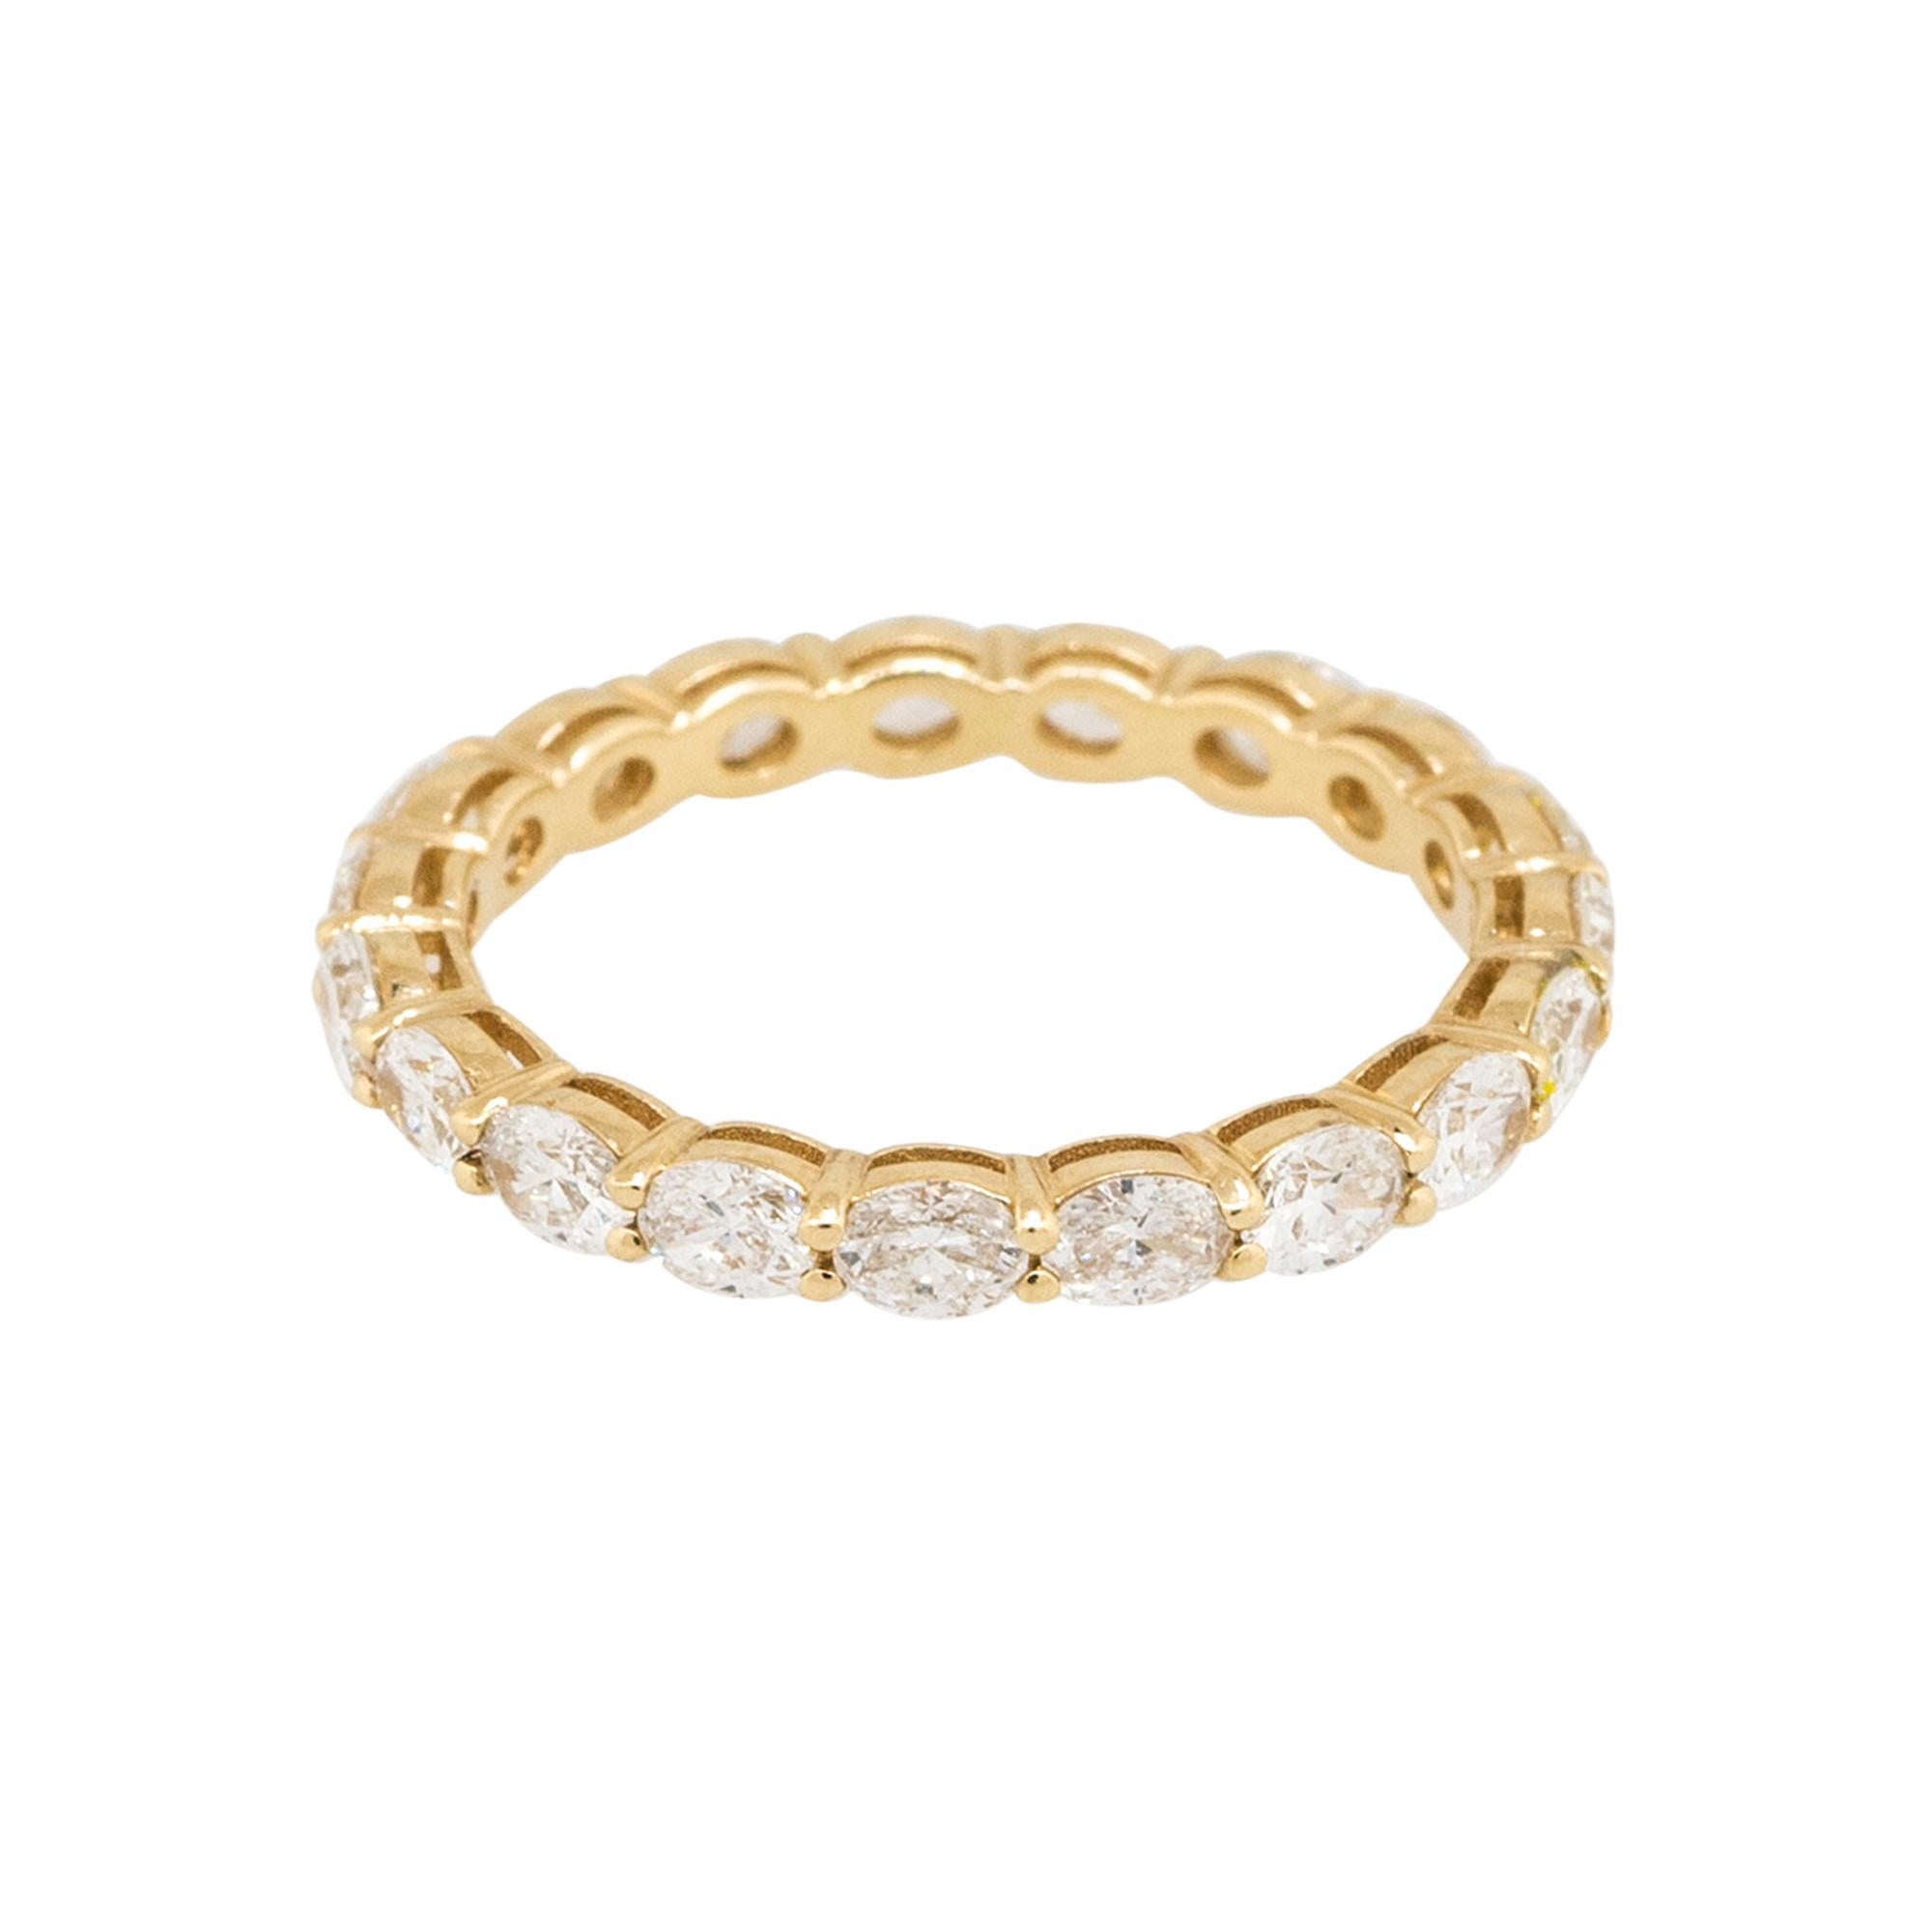 1.61 Carat Oval Cut Diamond Eternity Wedding Band 14 Karat In Stock In Excellent Condition For Sale In Boca Raton, FL